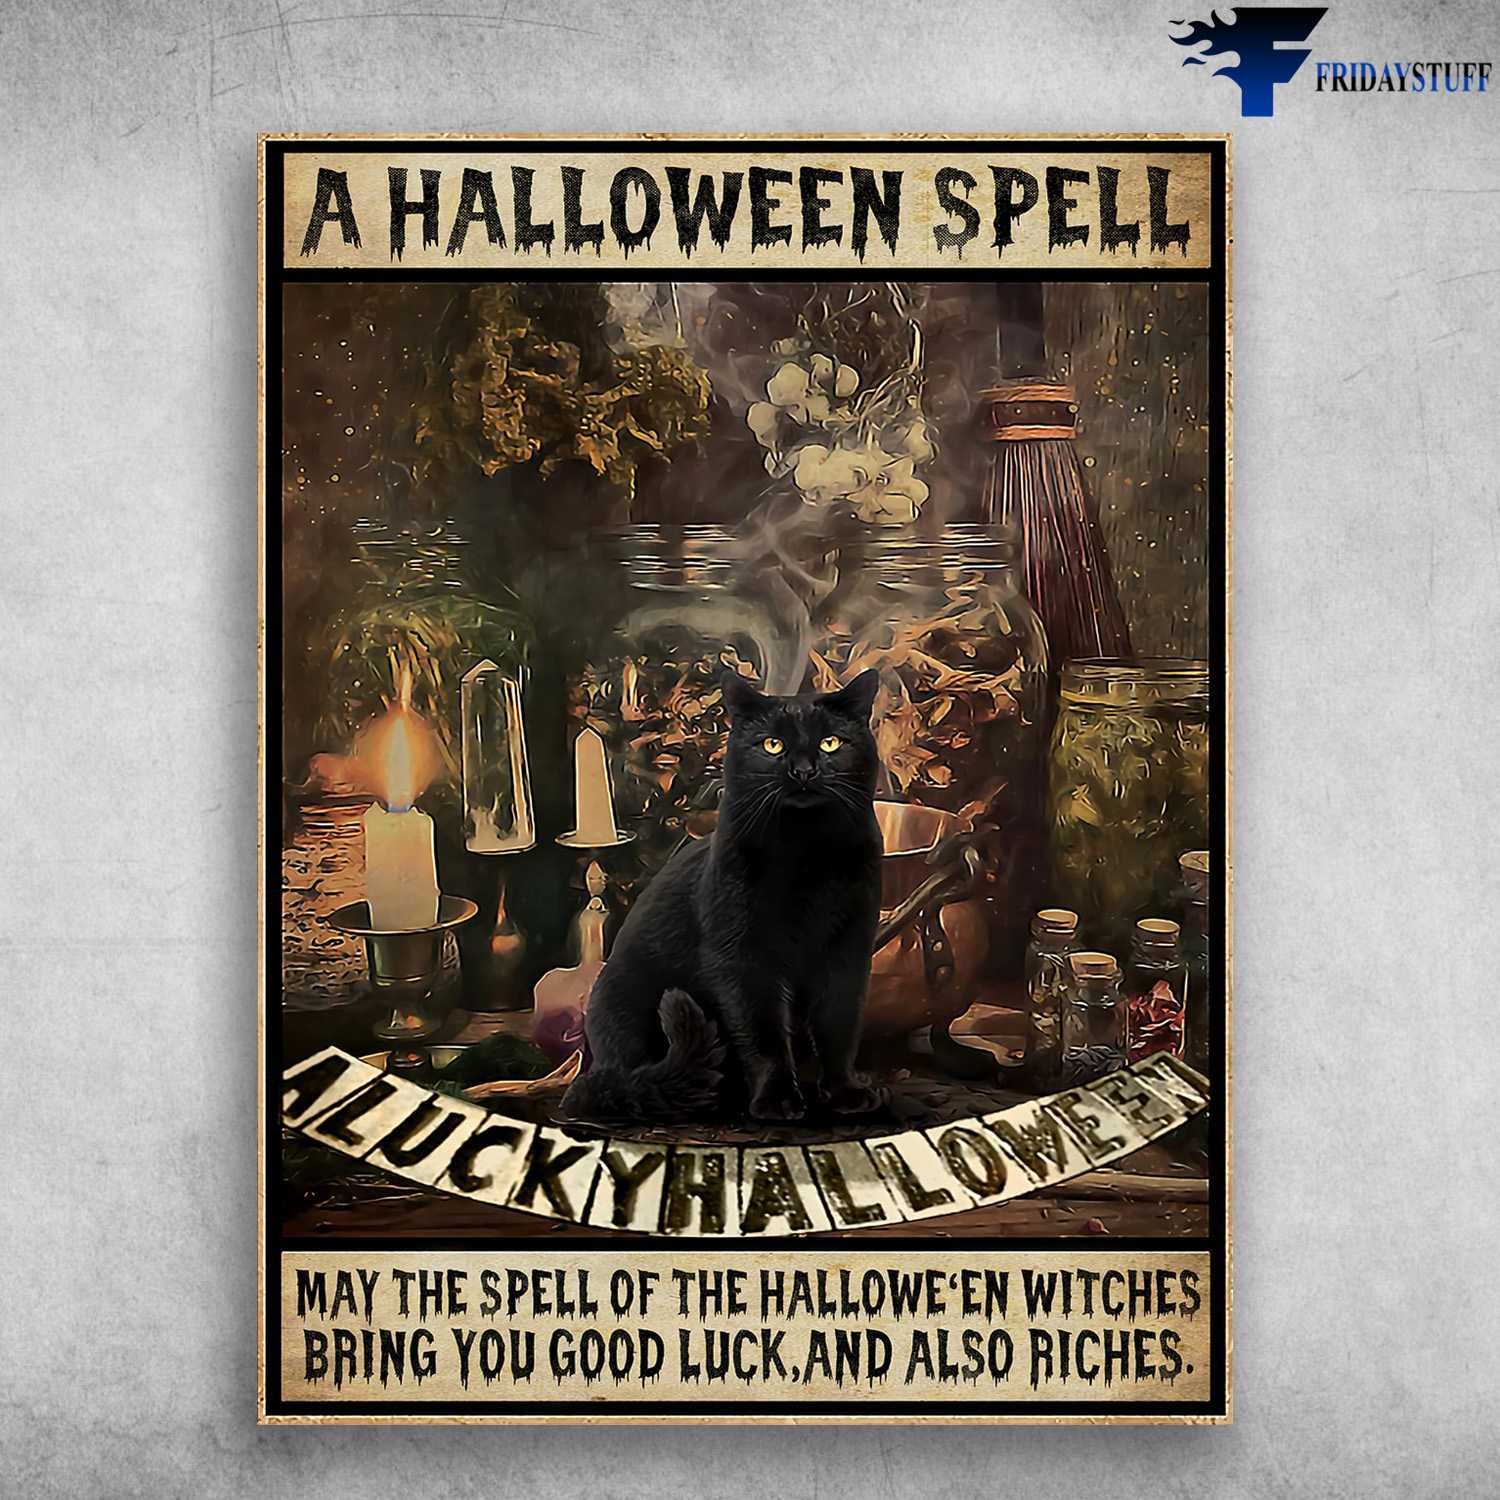 Halloween Poster, Black Cat - A Halloween Spell, May The Spell Of The Halloween Witches, Bring You Good Luck, And Also Riches